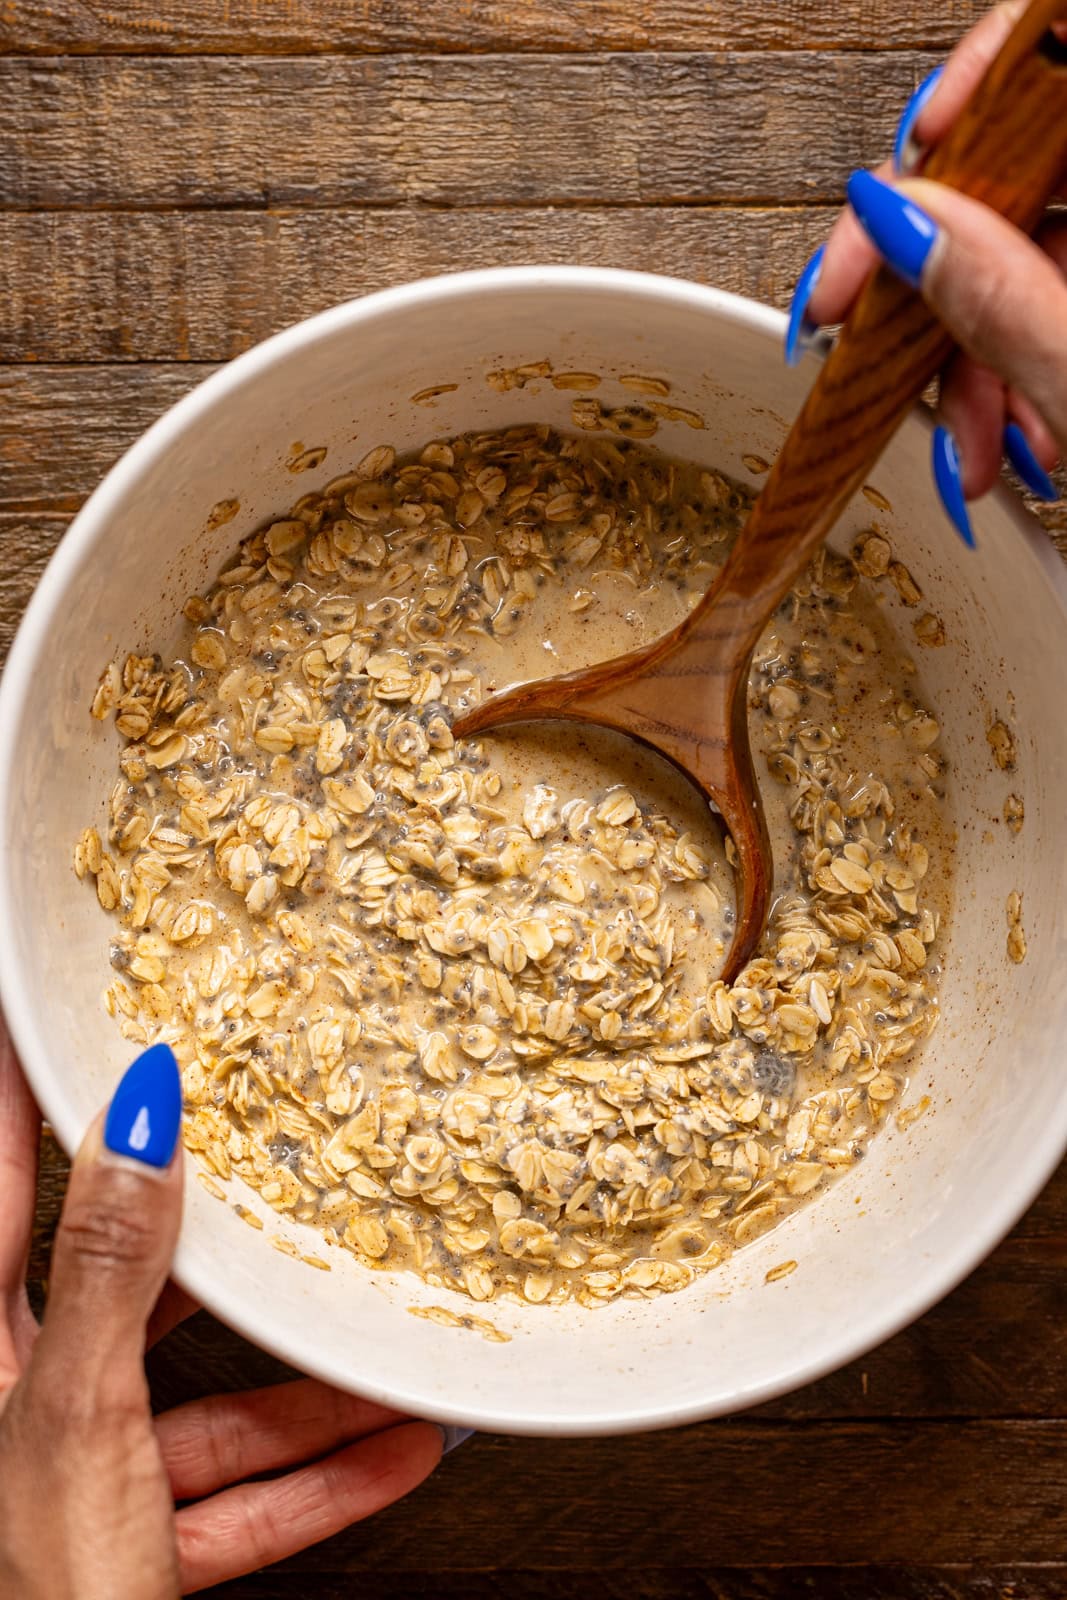 Oatmeal ingredients being stirred in a bowl with a wooden spoon.